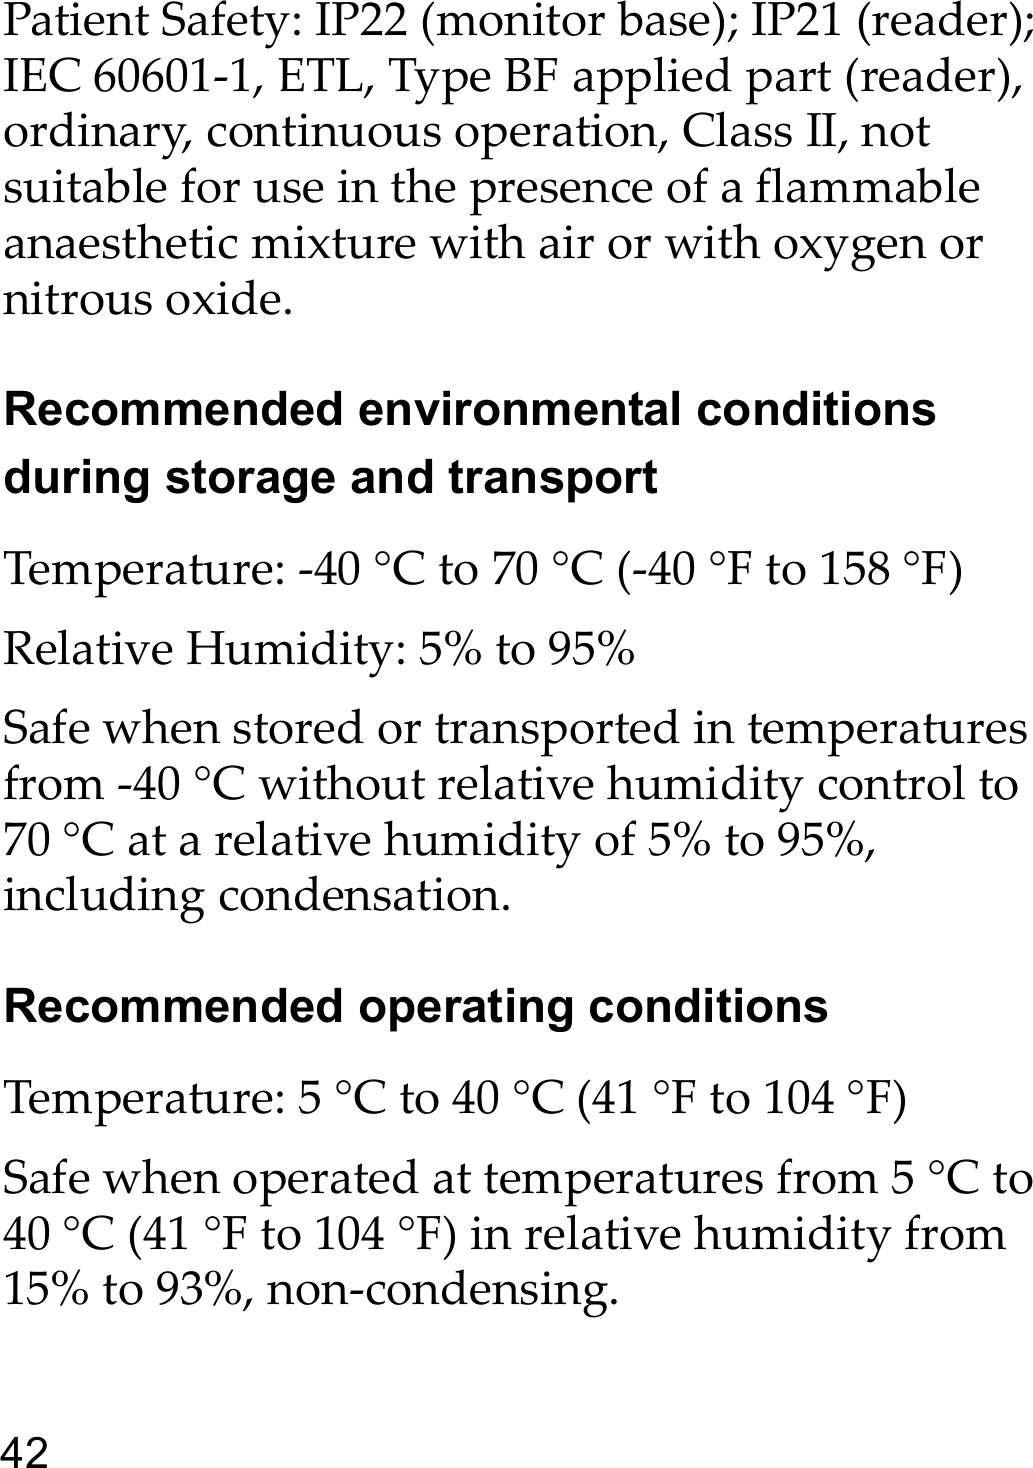 42Patient Safety: IP22 (monitor base); IP21 (reader); IEC 60601-1, ETL, Type BF applied part (reader), ordinary, continuous operation, Class II, not suitable for use in the presence of a flammable anaesthetic mixture with air or with oxygen or nitrous oxide.Recommended environmental conditions during storage and transportTemperature: -40 °C to 70 °C (-40 °F to 158 °F)Relative Humidity: 5% to 95%Safe when stored or transported in temperatures from -40 °C without relative humidity control to 70 °C at a relative humidity of 5% to 95%, including condensation.Recommended operating conditionsTemperature: 5 °C to 40 °C (41 °F to 104 °F)Safe when operated at temperatures from 5 °C to 40 °C (41 °F to 104 °F) in relative humidity from 15% to 93%, non-condensing.